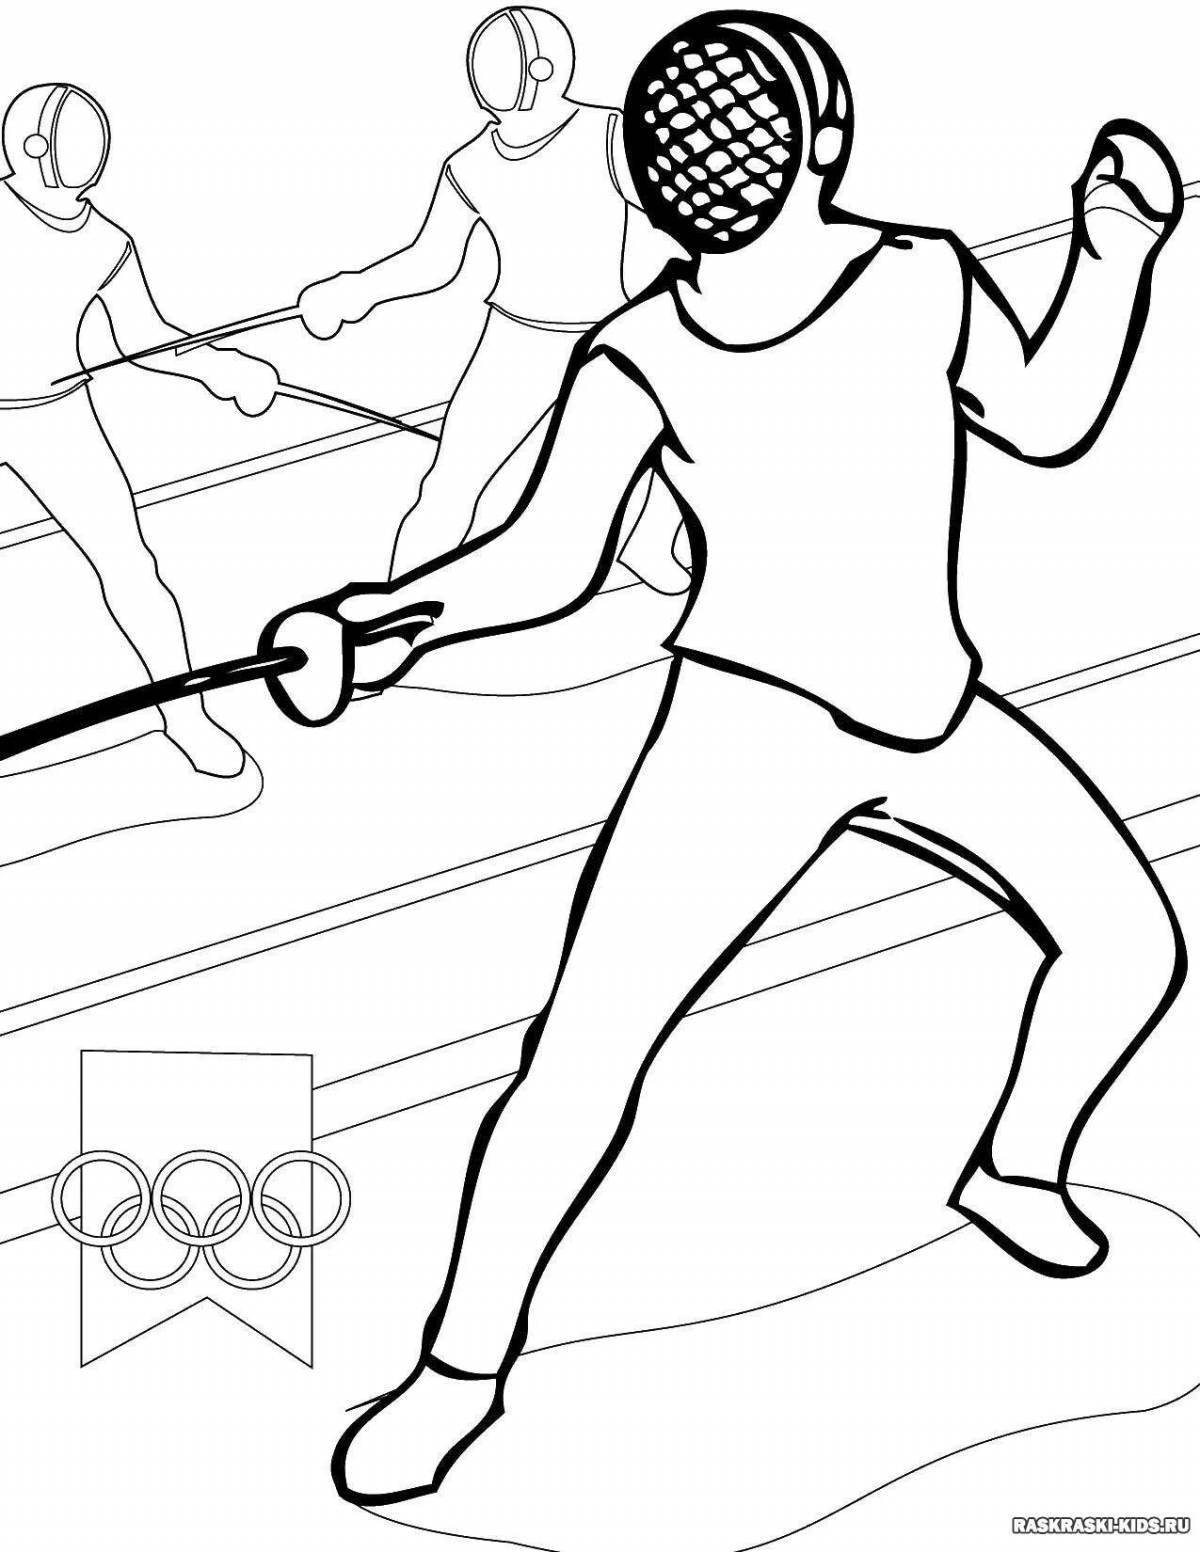 Holiday coloring for children's olympic sports